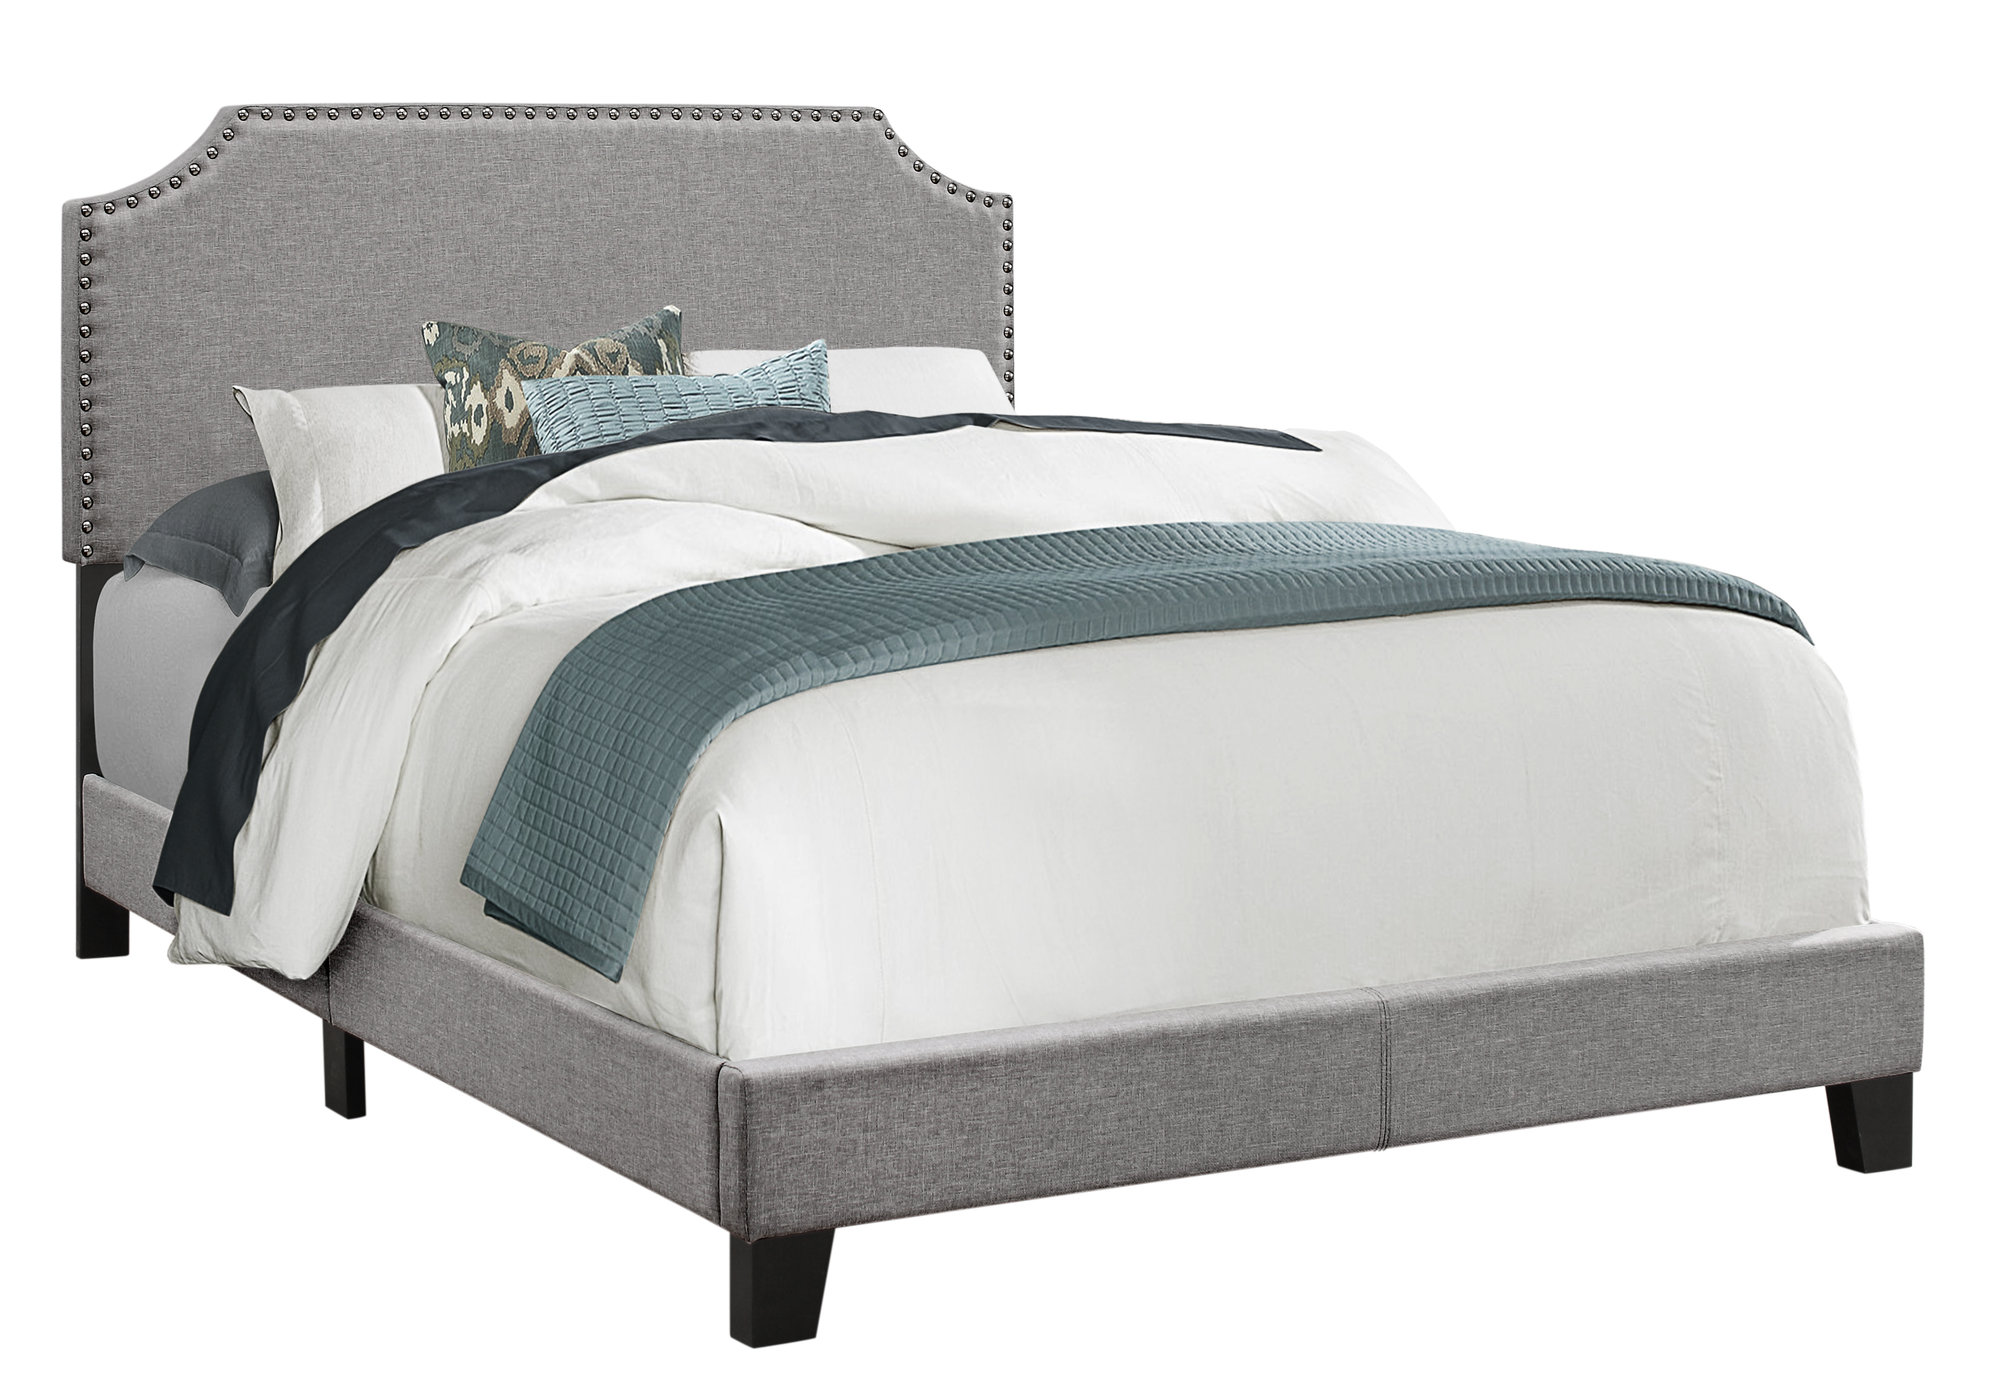 BED - FULL SIZE / CONTEMPORARY / GREY LINEN WITH CHROME TRIM